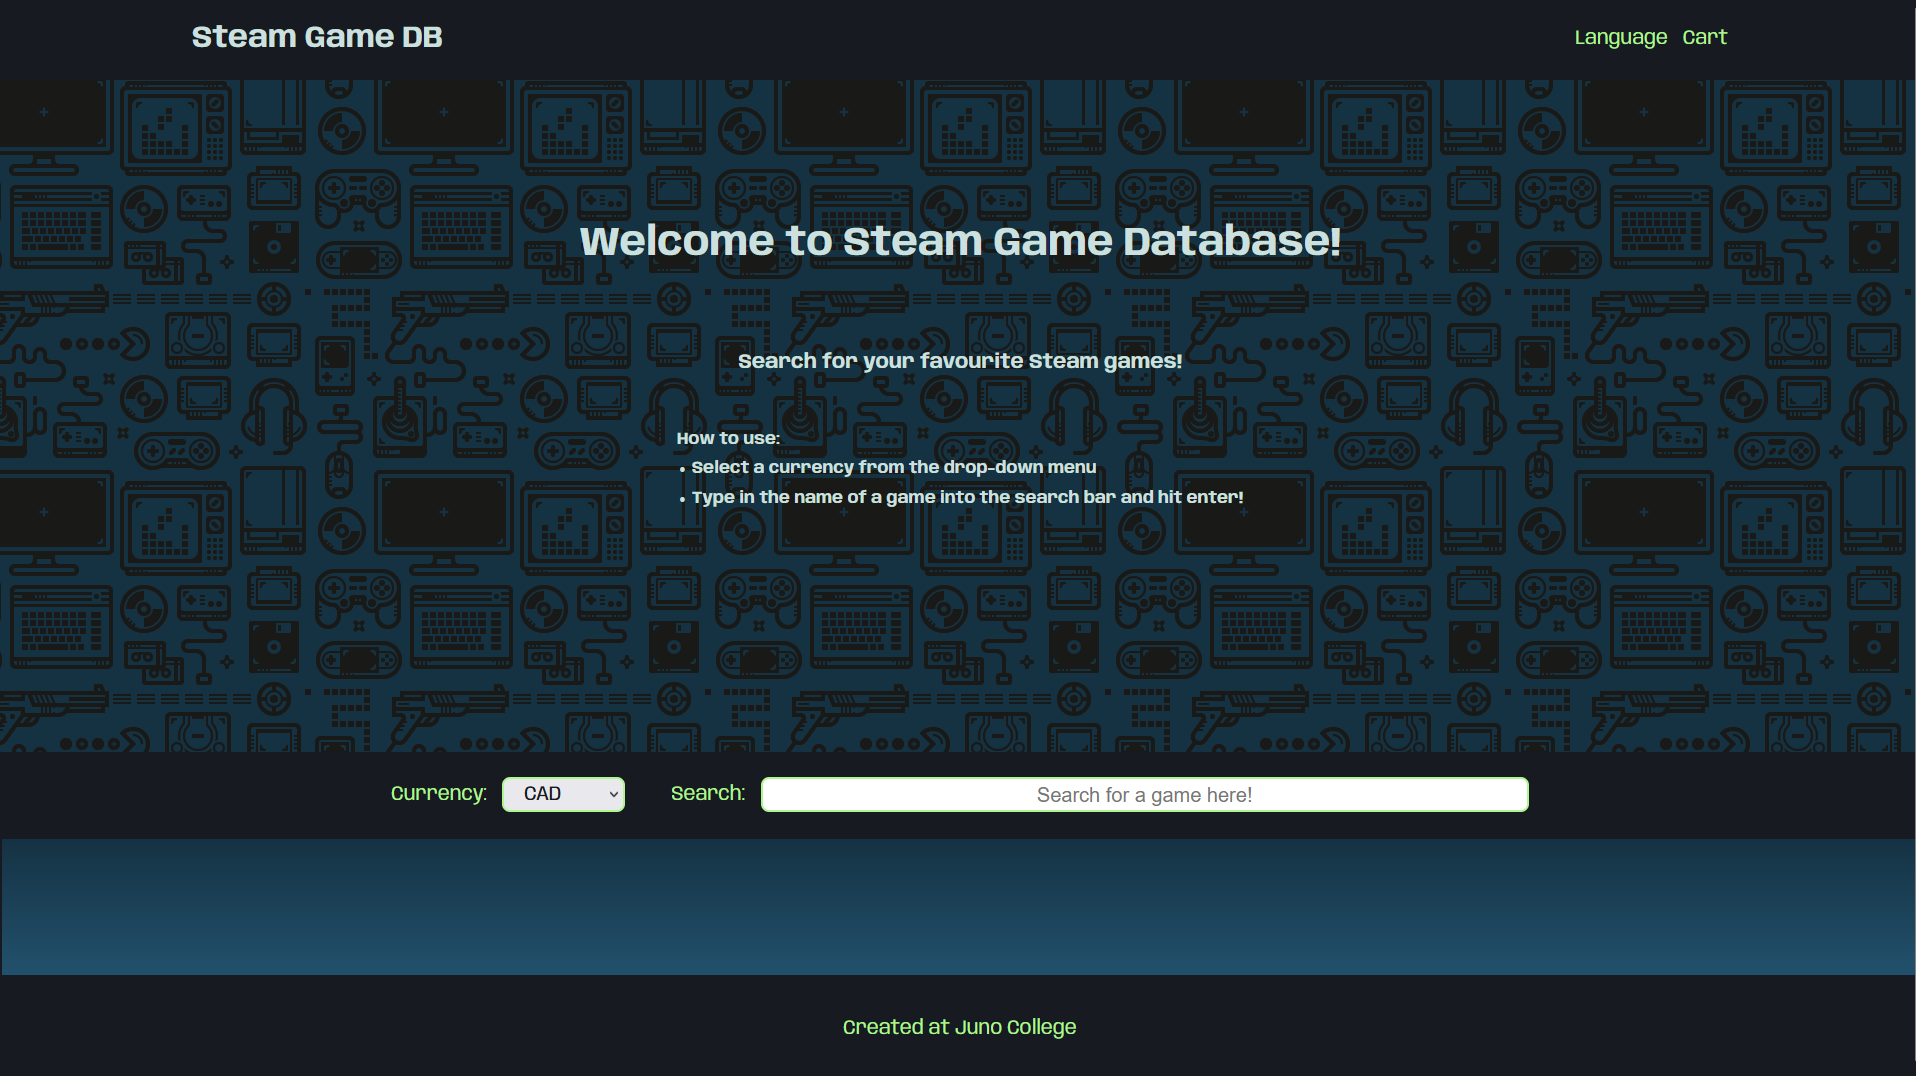 Landing page for Steam Game DB